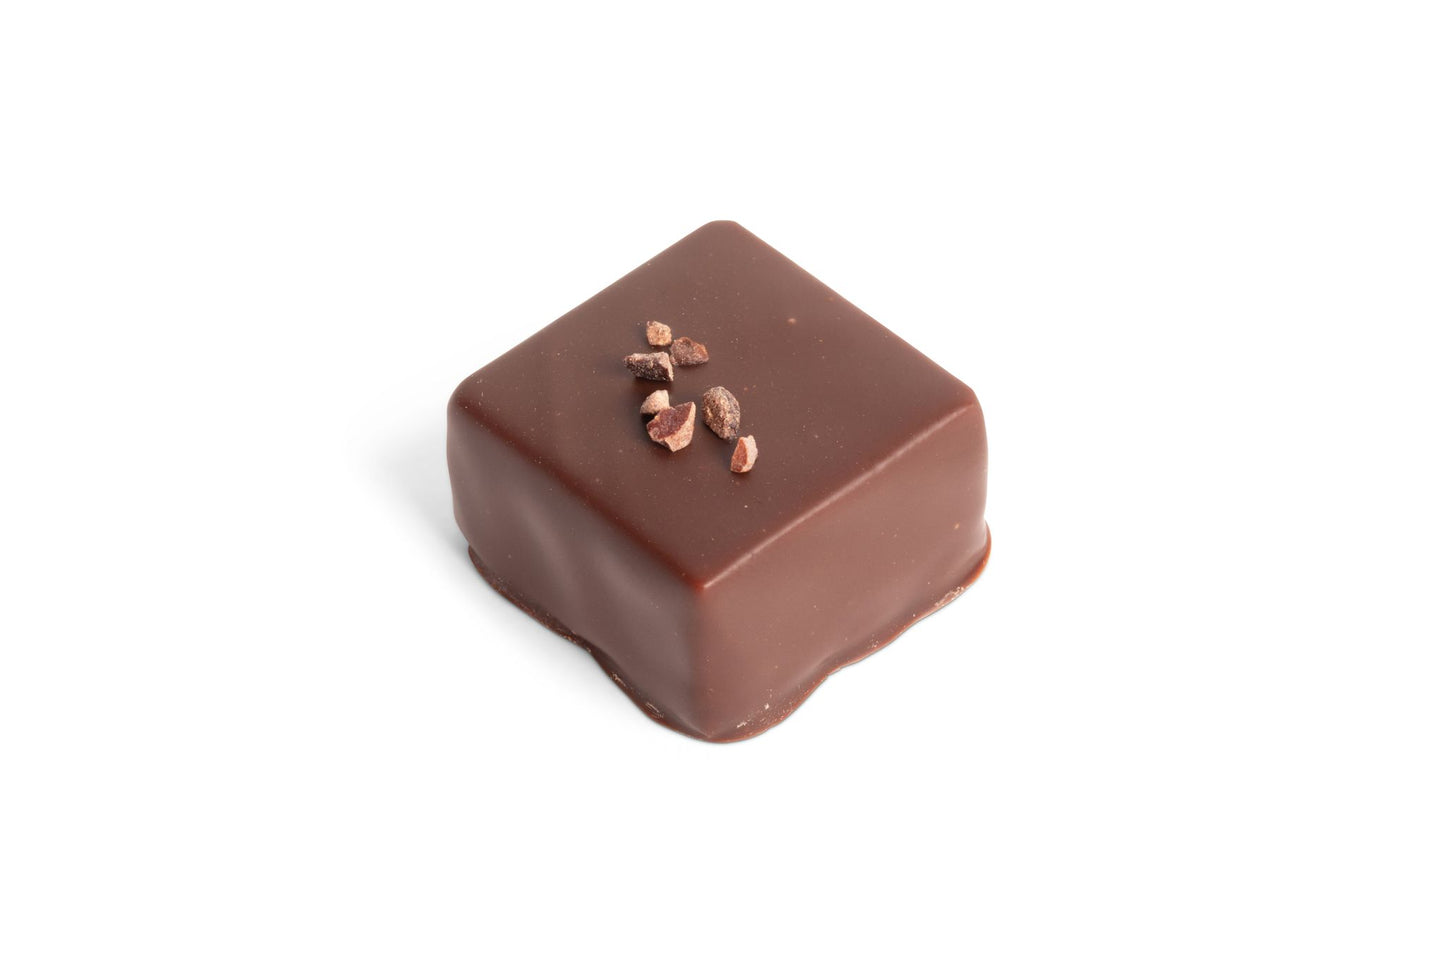 Hill Country Chocolate offers indulgent treats like Dark Chocolate Caramels topped with crunchy nuts, making for a perfect combination of rich flavors and textures.